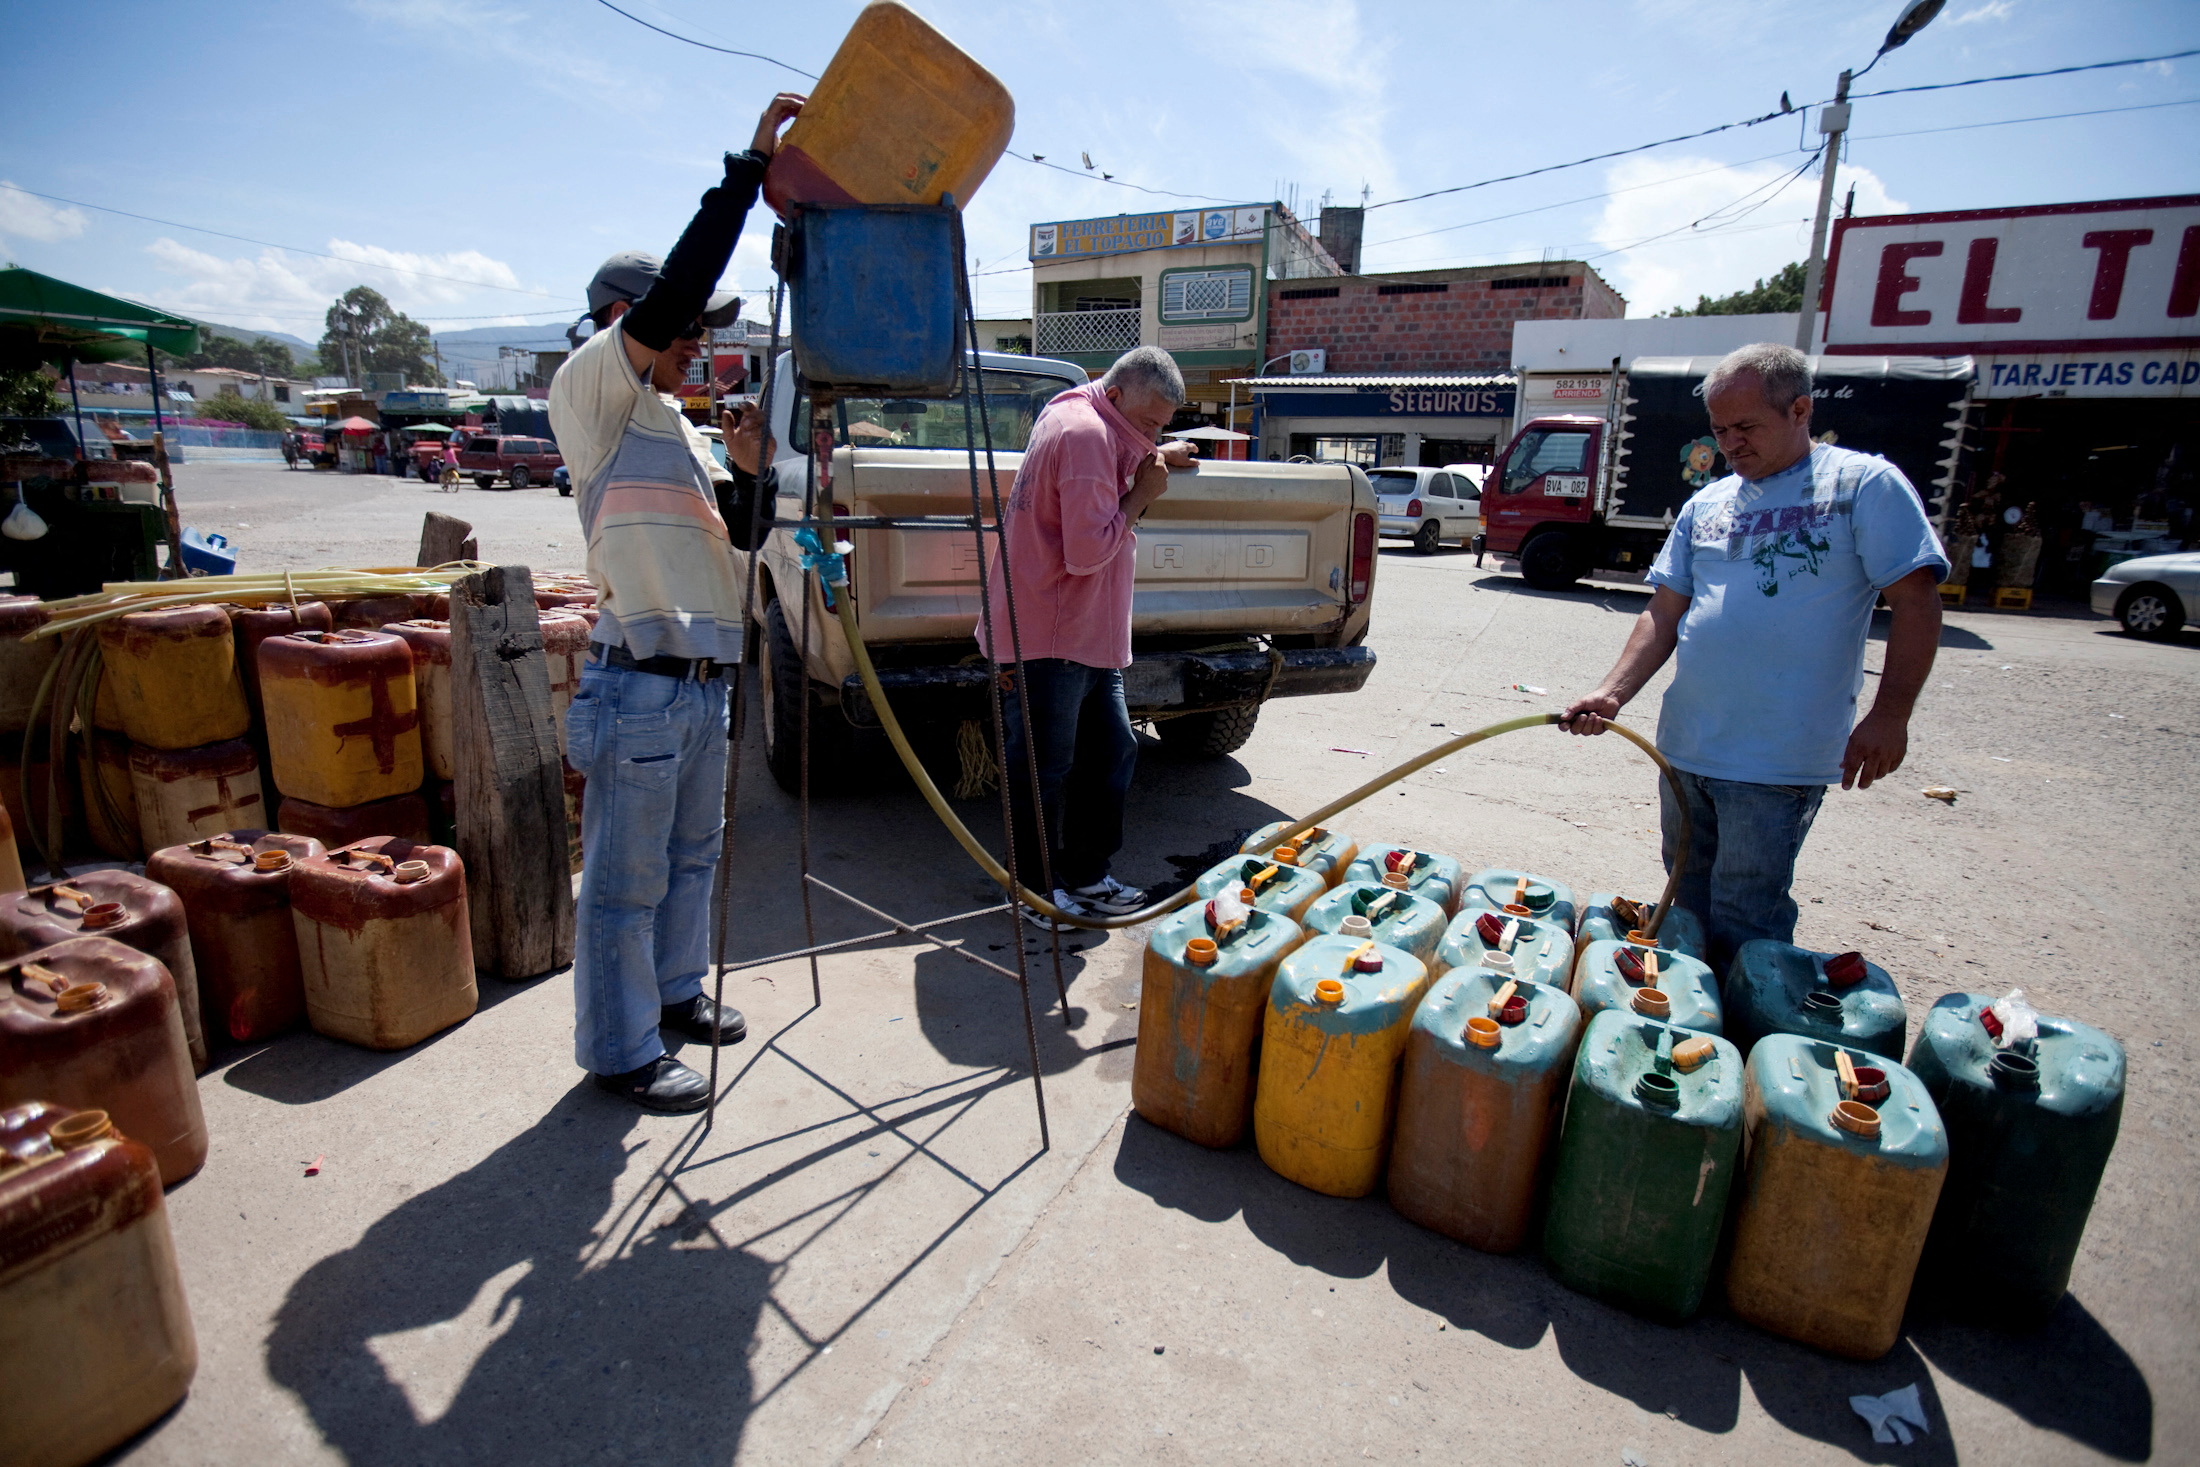 Gasoline smugglers fills tanks with gasoline on the Colombian side at the border between San Antonio and Cucuta